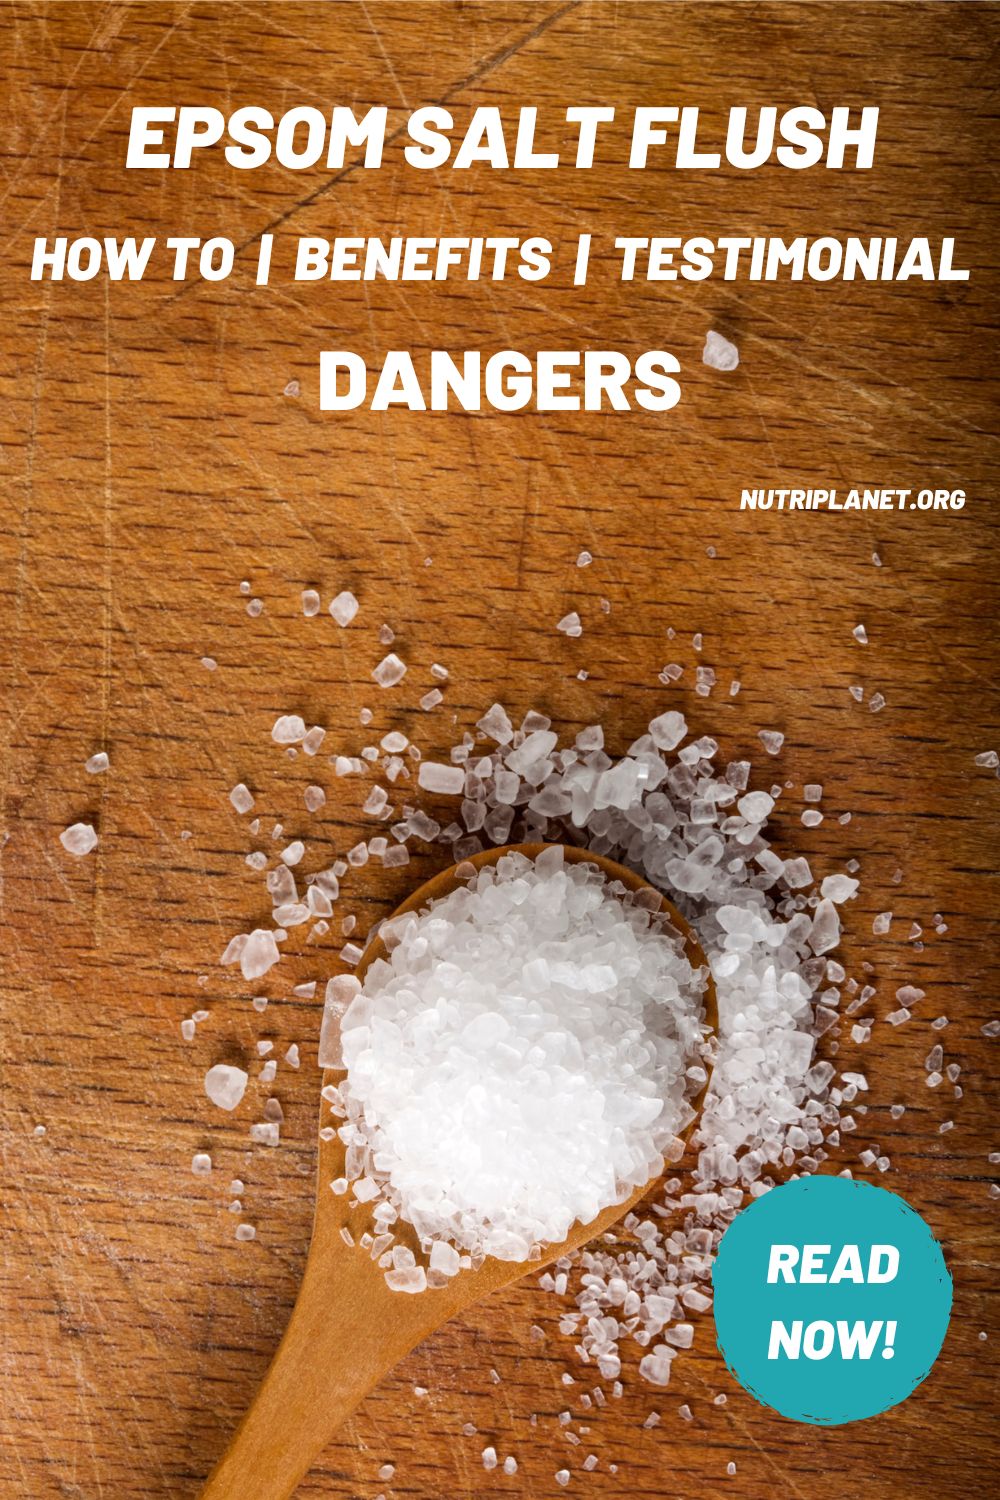 Learn what is Epsom salt aka magnesium sulphate, how to use Epsom salt as a laxative, the dangers associated with Epsom salt flush, natural laxatives for constipation as well as laxative foods, and my own brutally honest Epsom salt flush testimonial. 